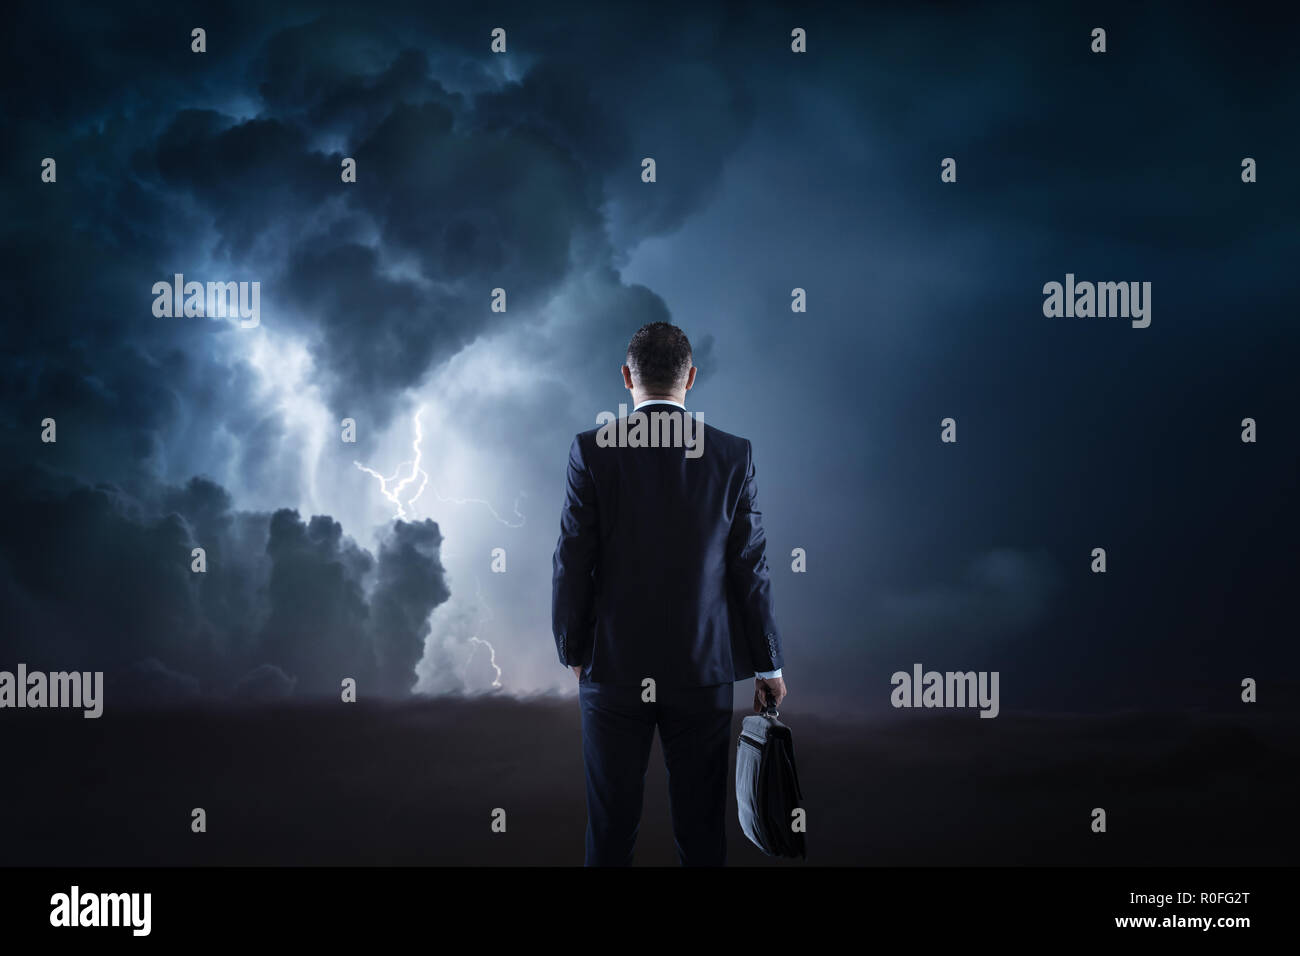 Trouble ahead, businessman standing in front of a stormy sky. Stock Photo